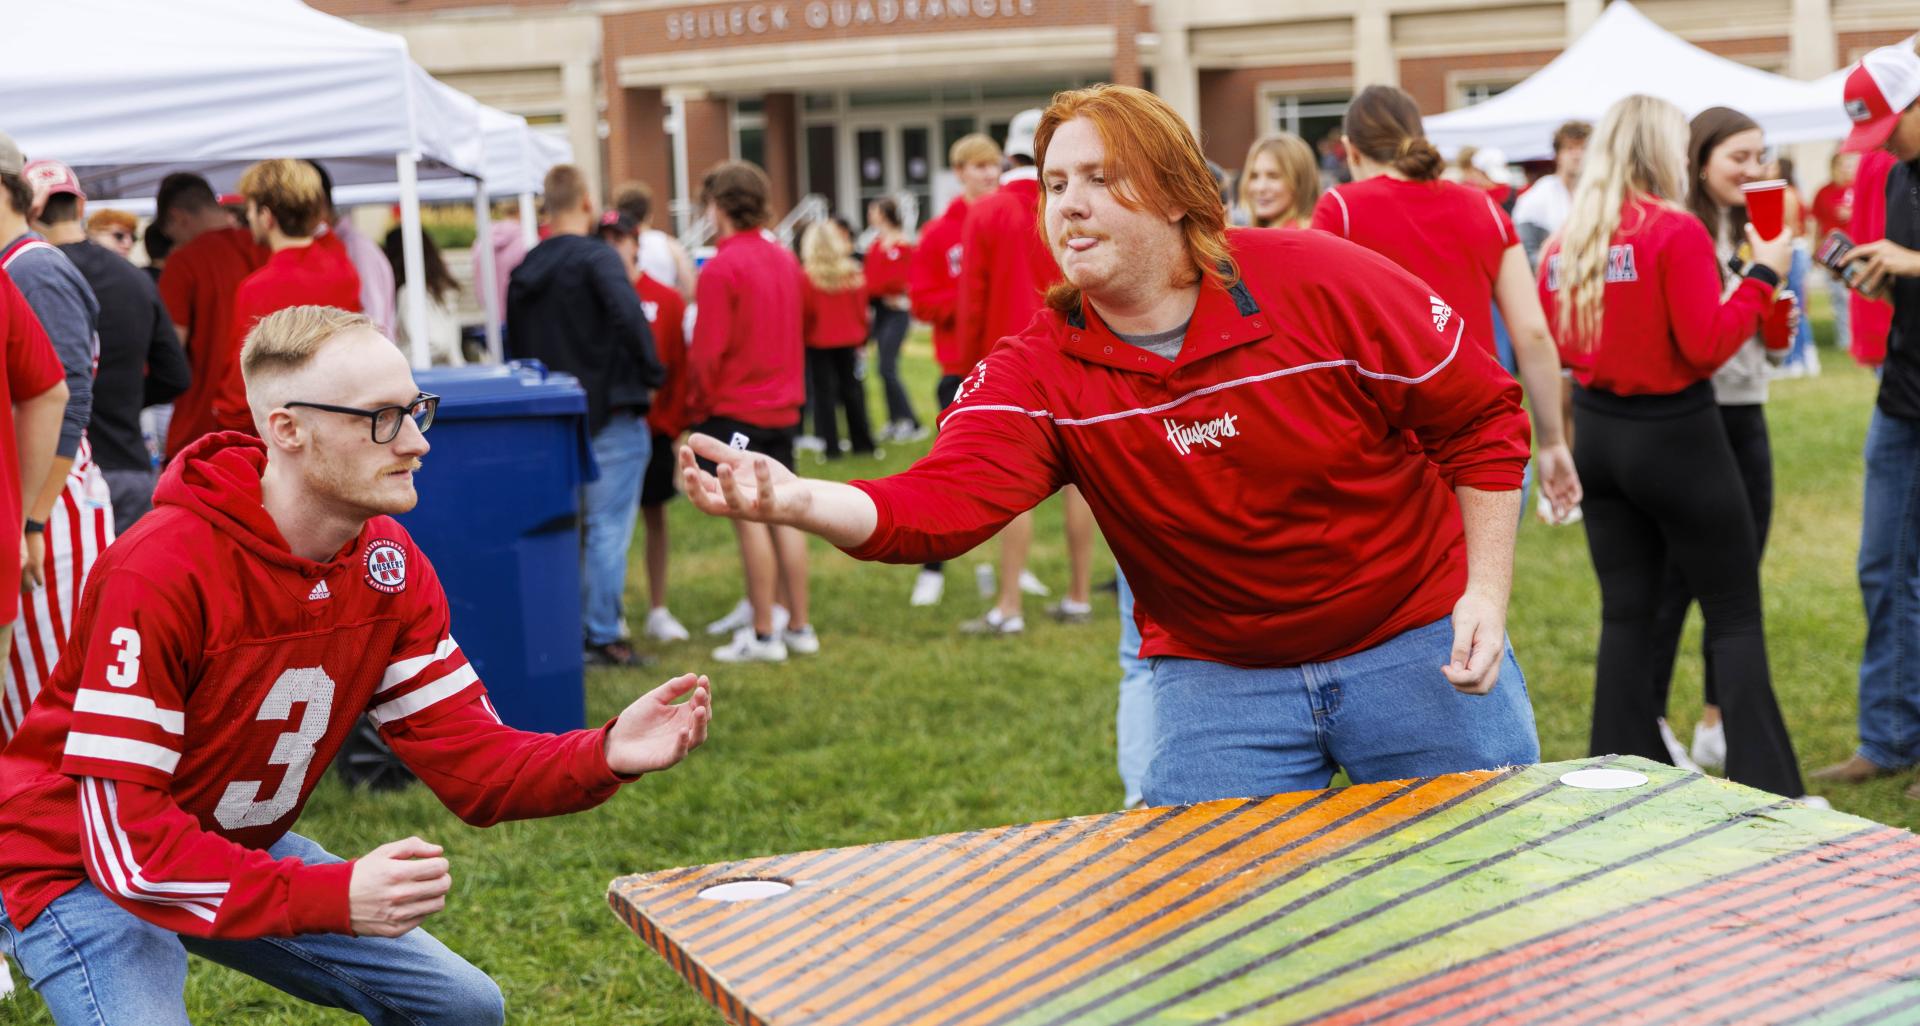 Students play games during a Husker Tailgate in the green space of the Nebraska Union